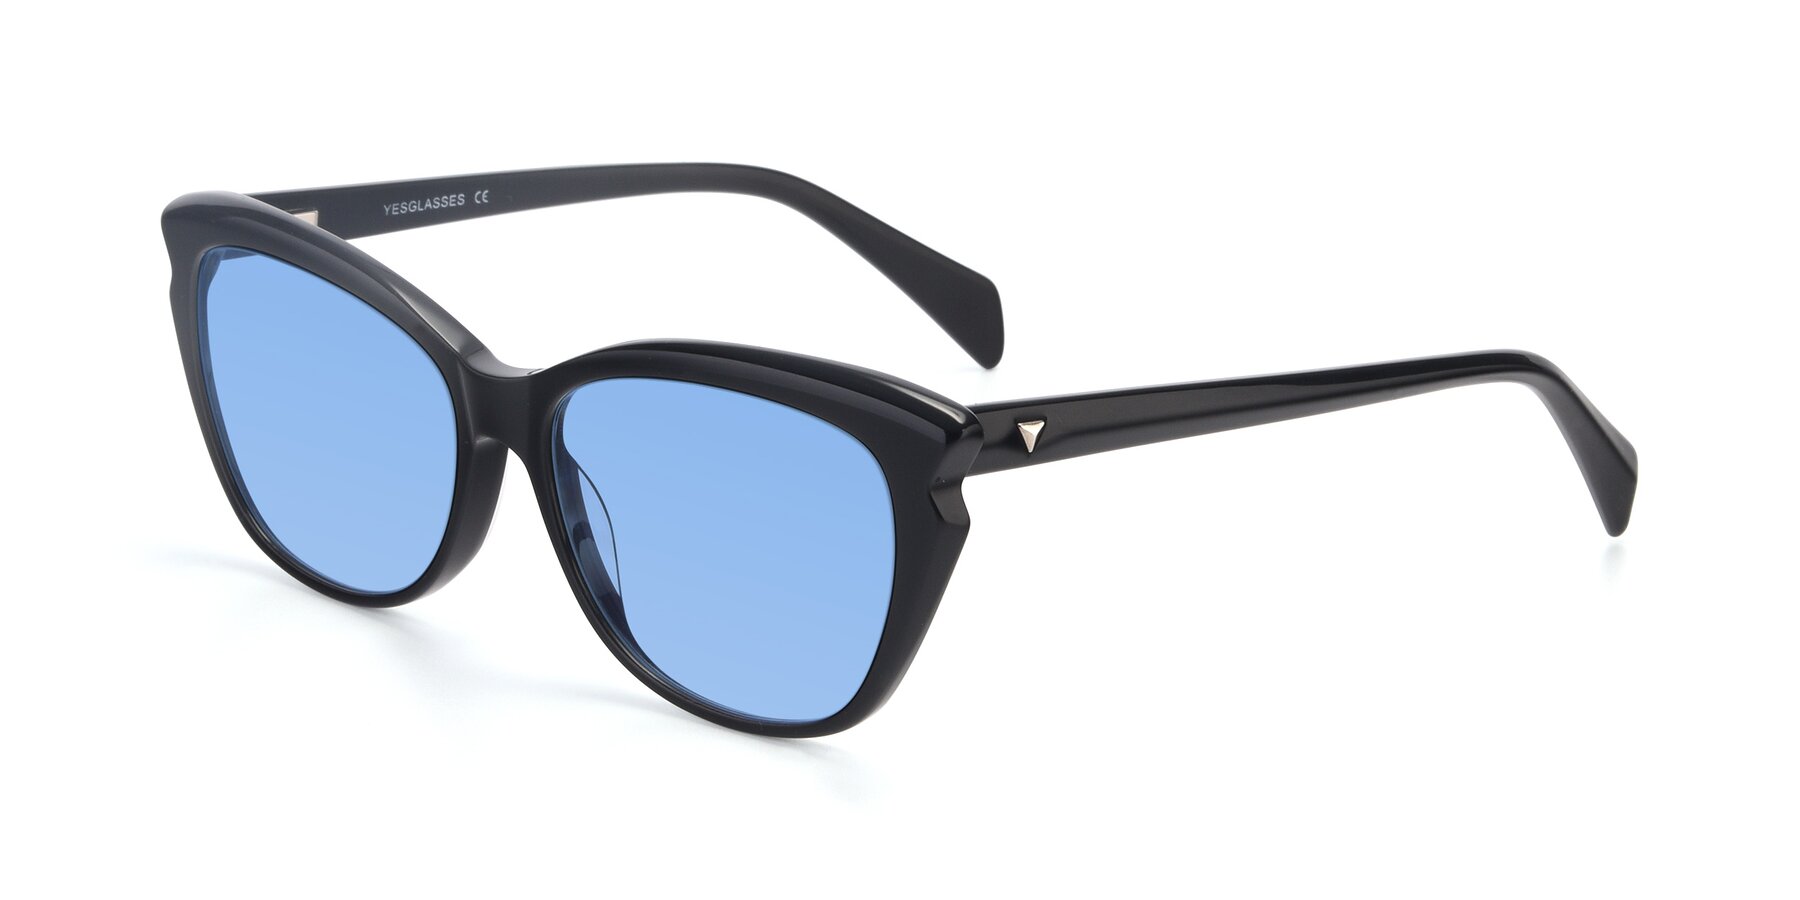 Angle of 17629 in Black with Medium Blue Tinted Lenses